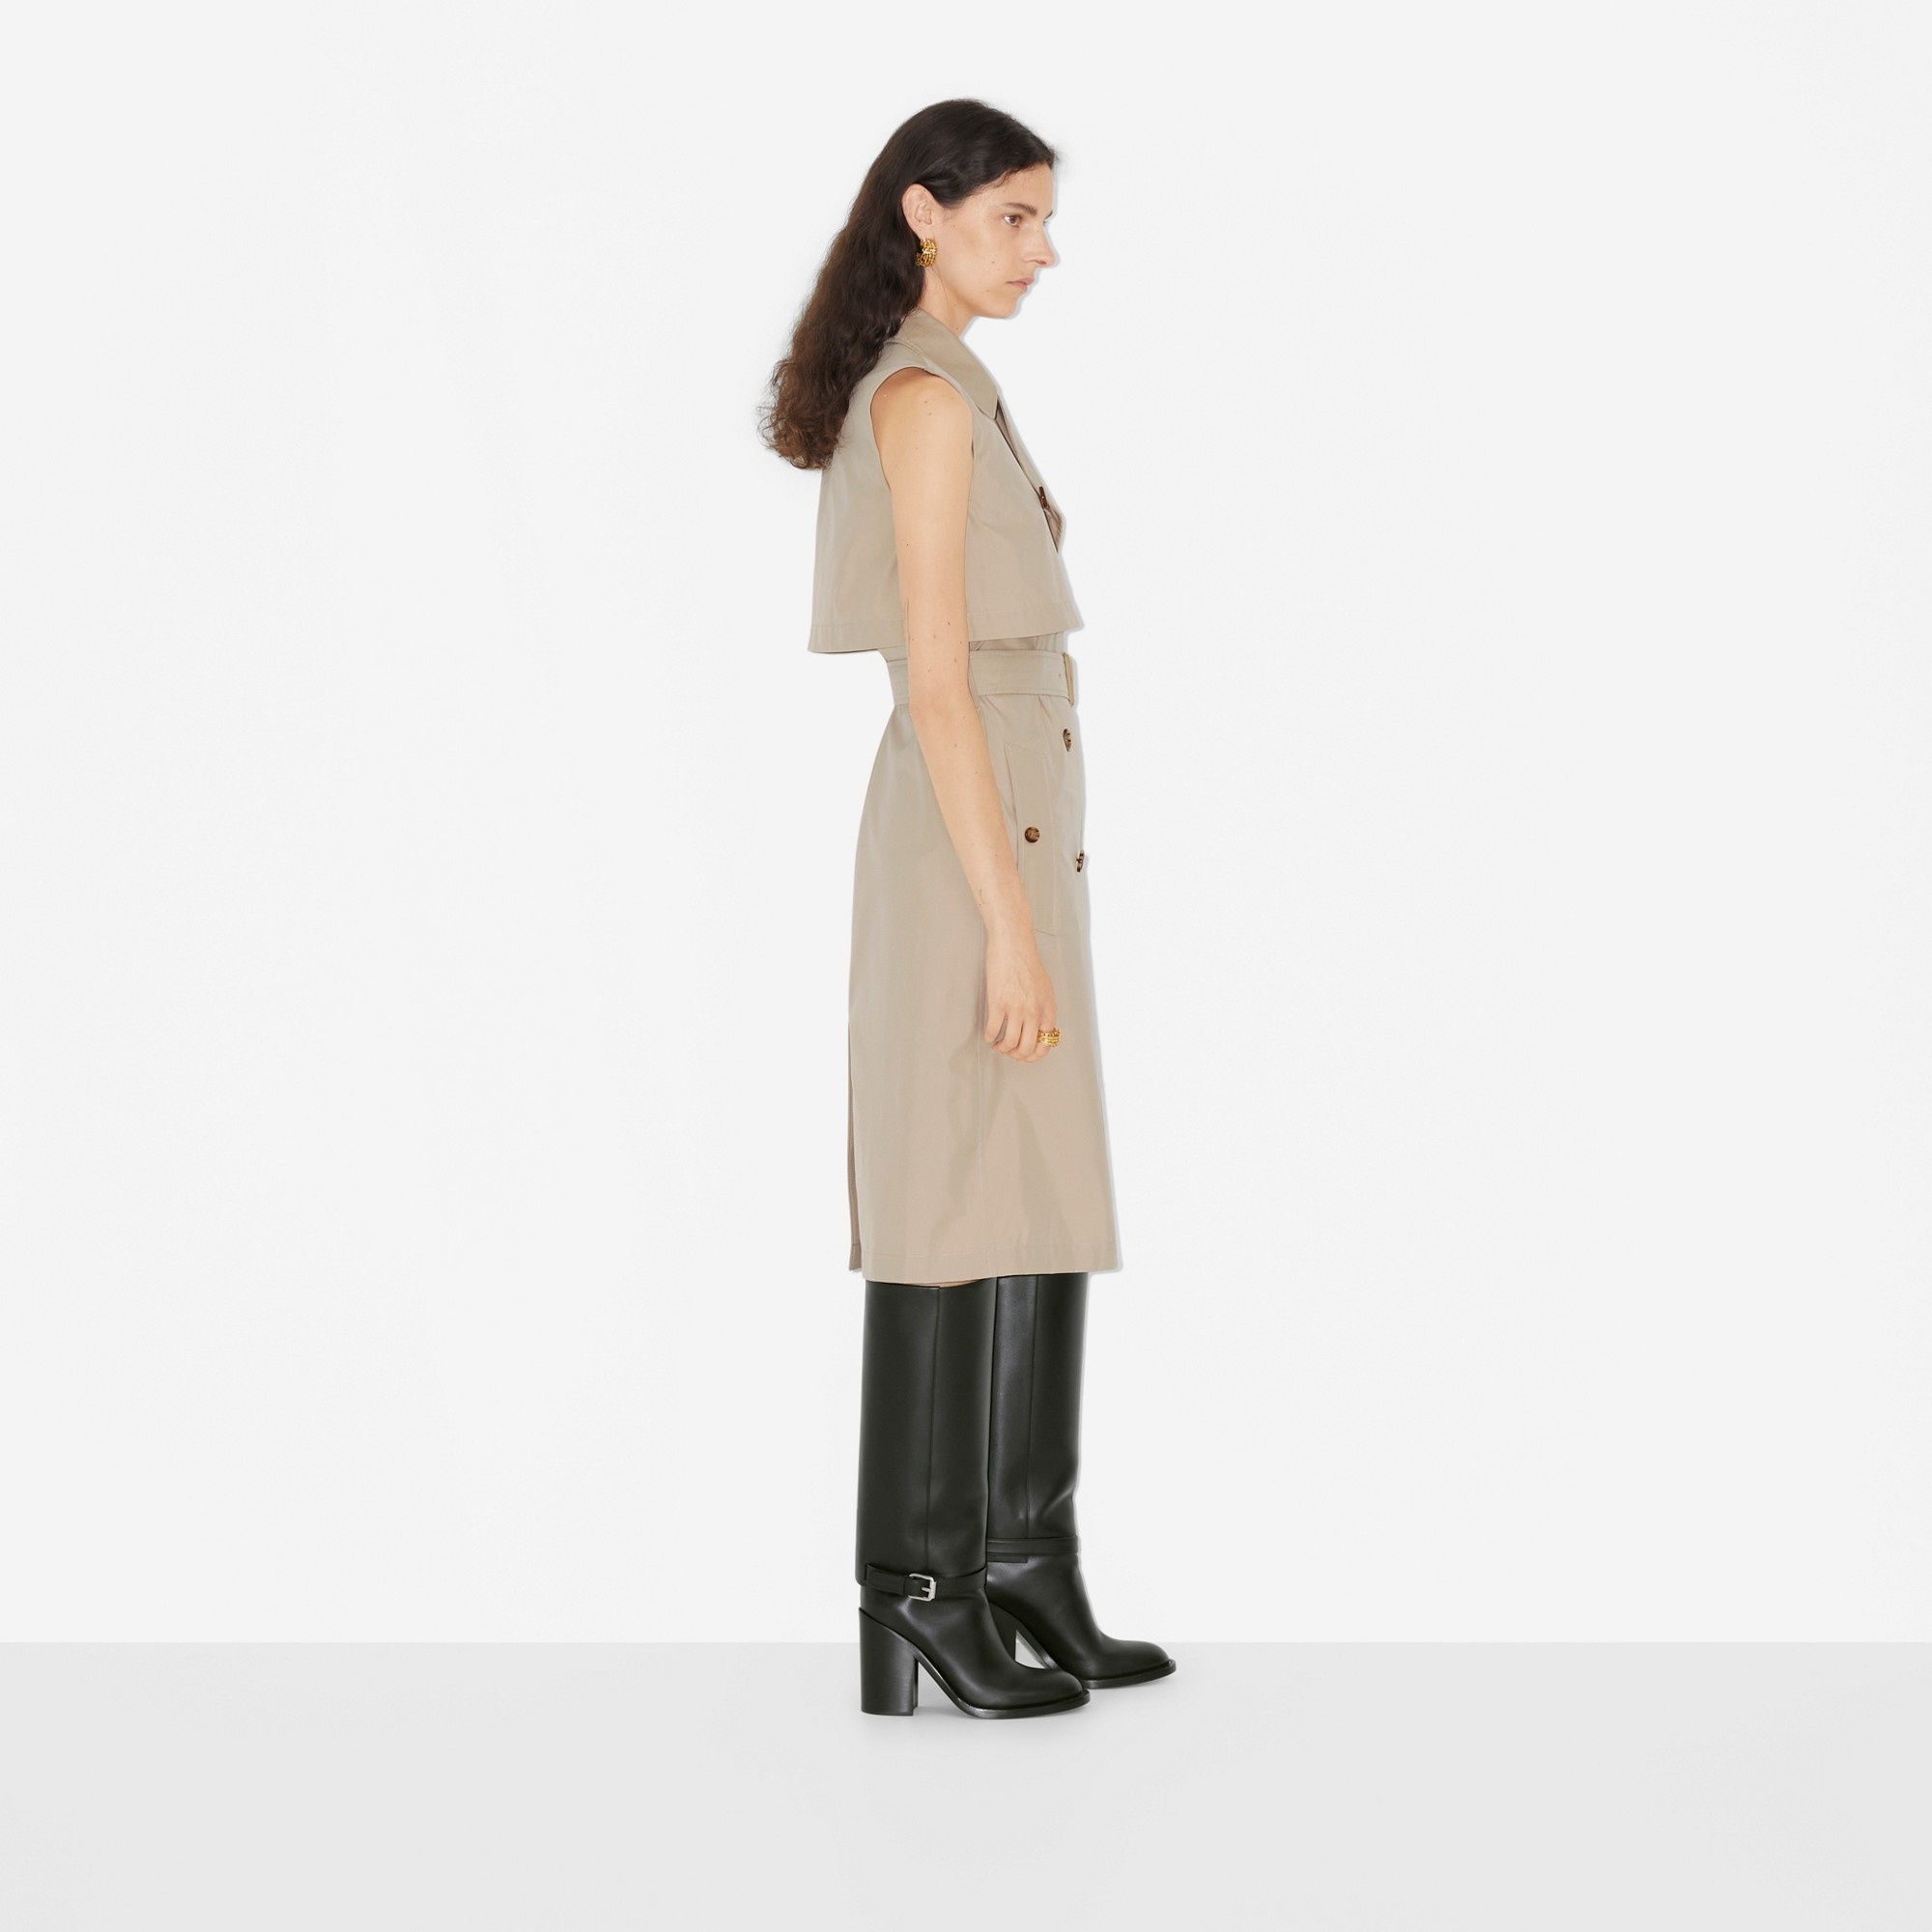 Cotton Blend Trench Dress - 3